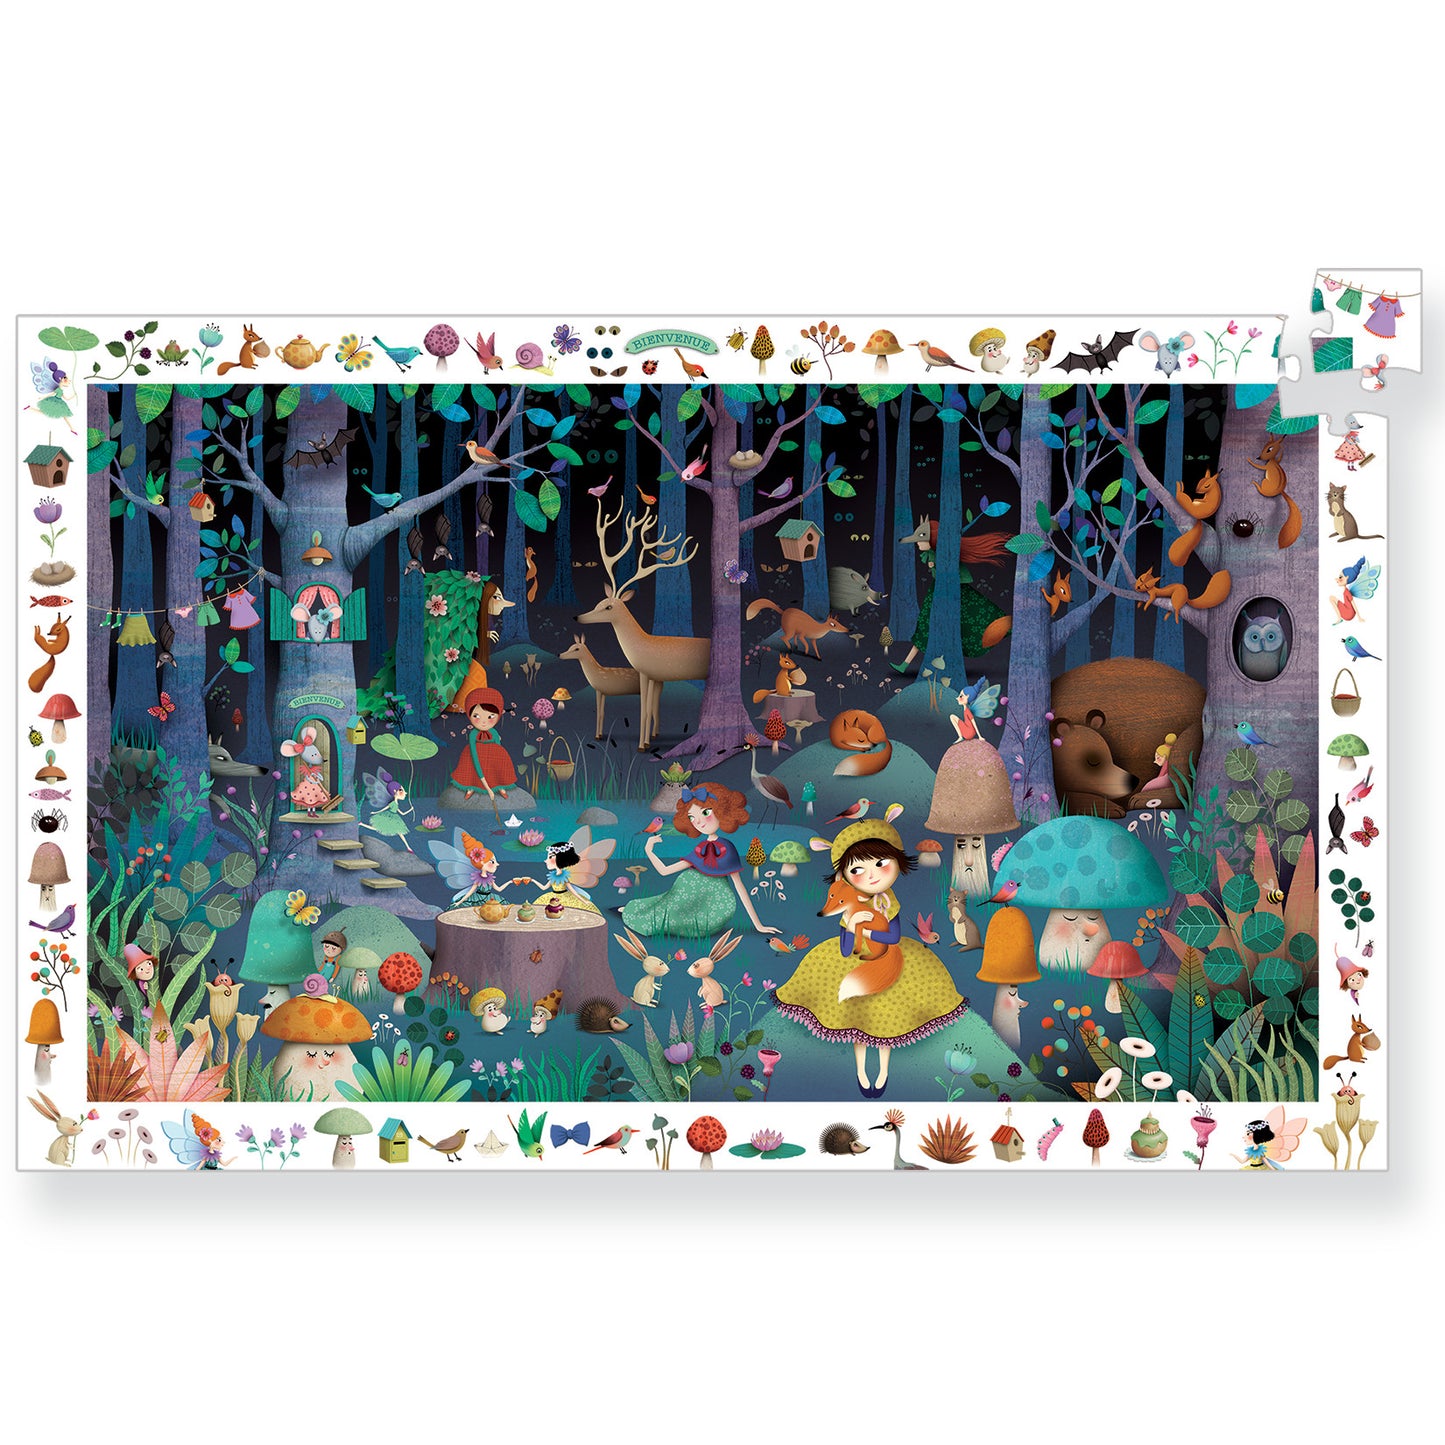 Djeco Puzzle Observation Enchanted Forest 100pc - K and K Creative Toys